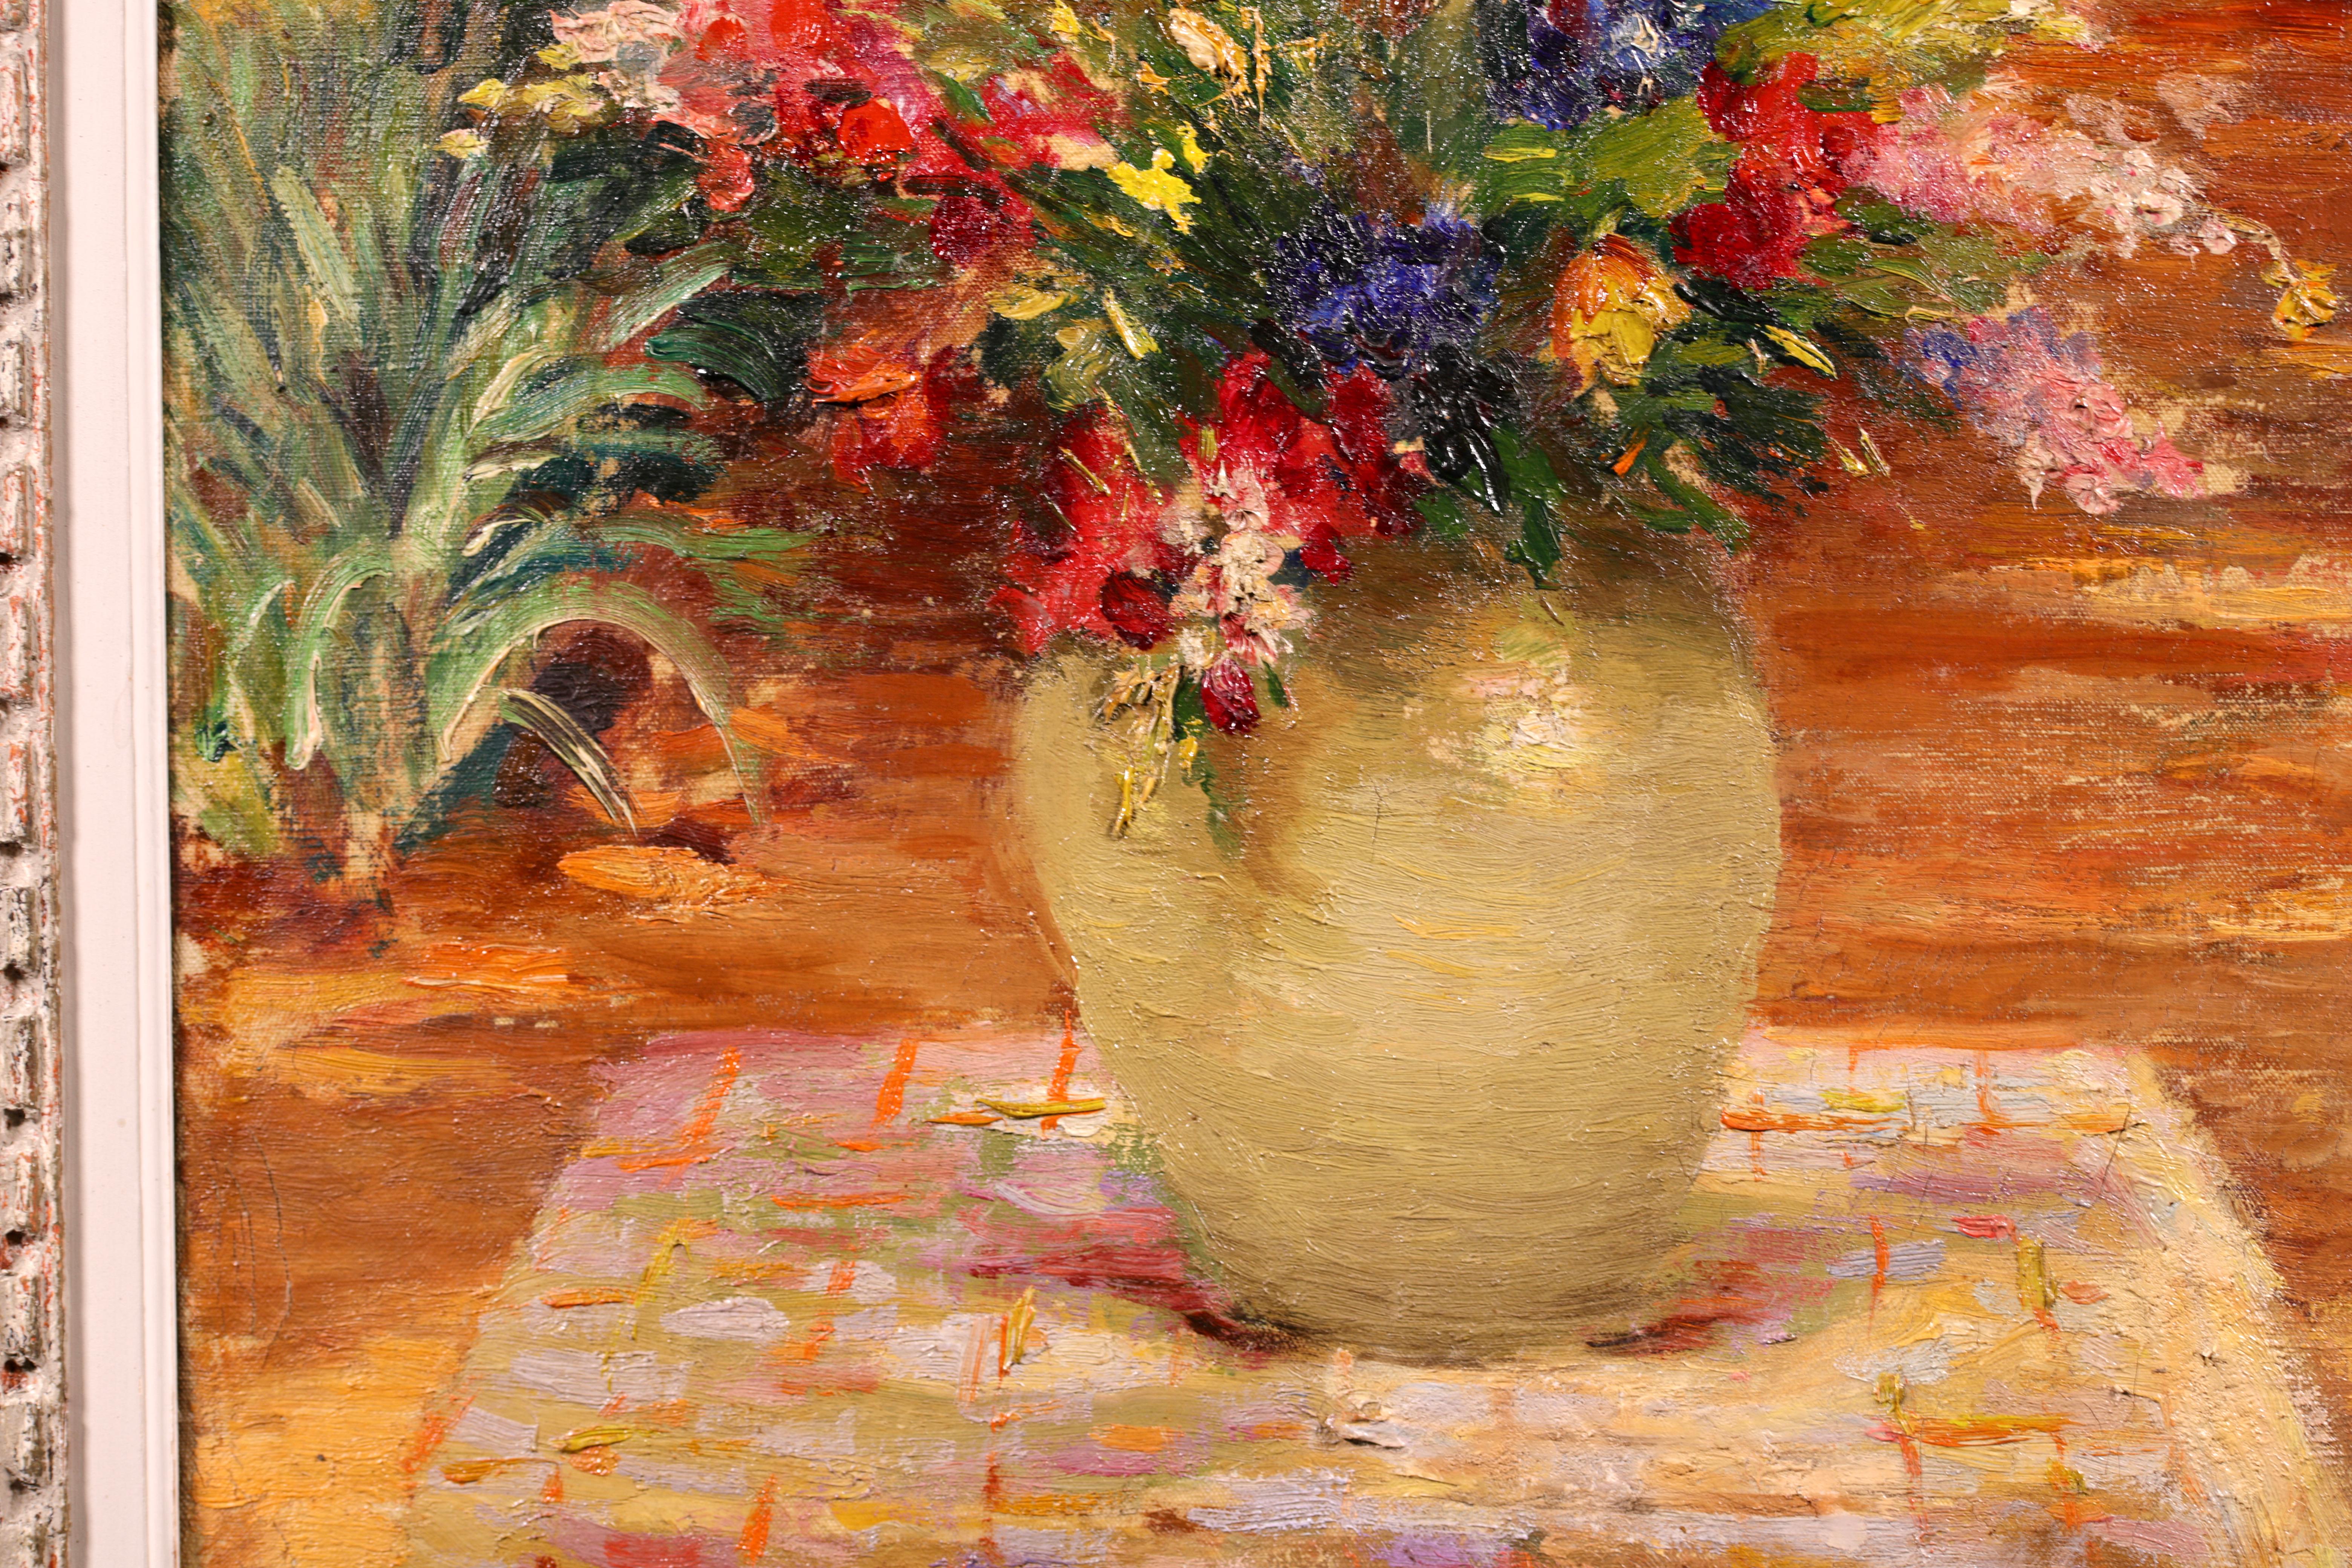 Signed post impressionist still life oil on canvas circa 1940 by sought after French impressionist painter Marcel Dyf. The work depicts a vase filled with flowers of all colours placed on a table in a garden. In the distance a young girl in a blue